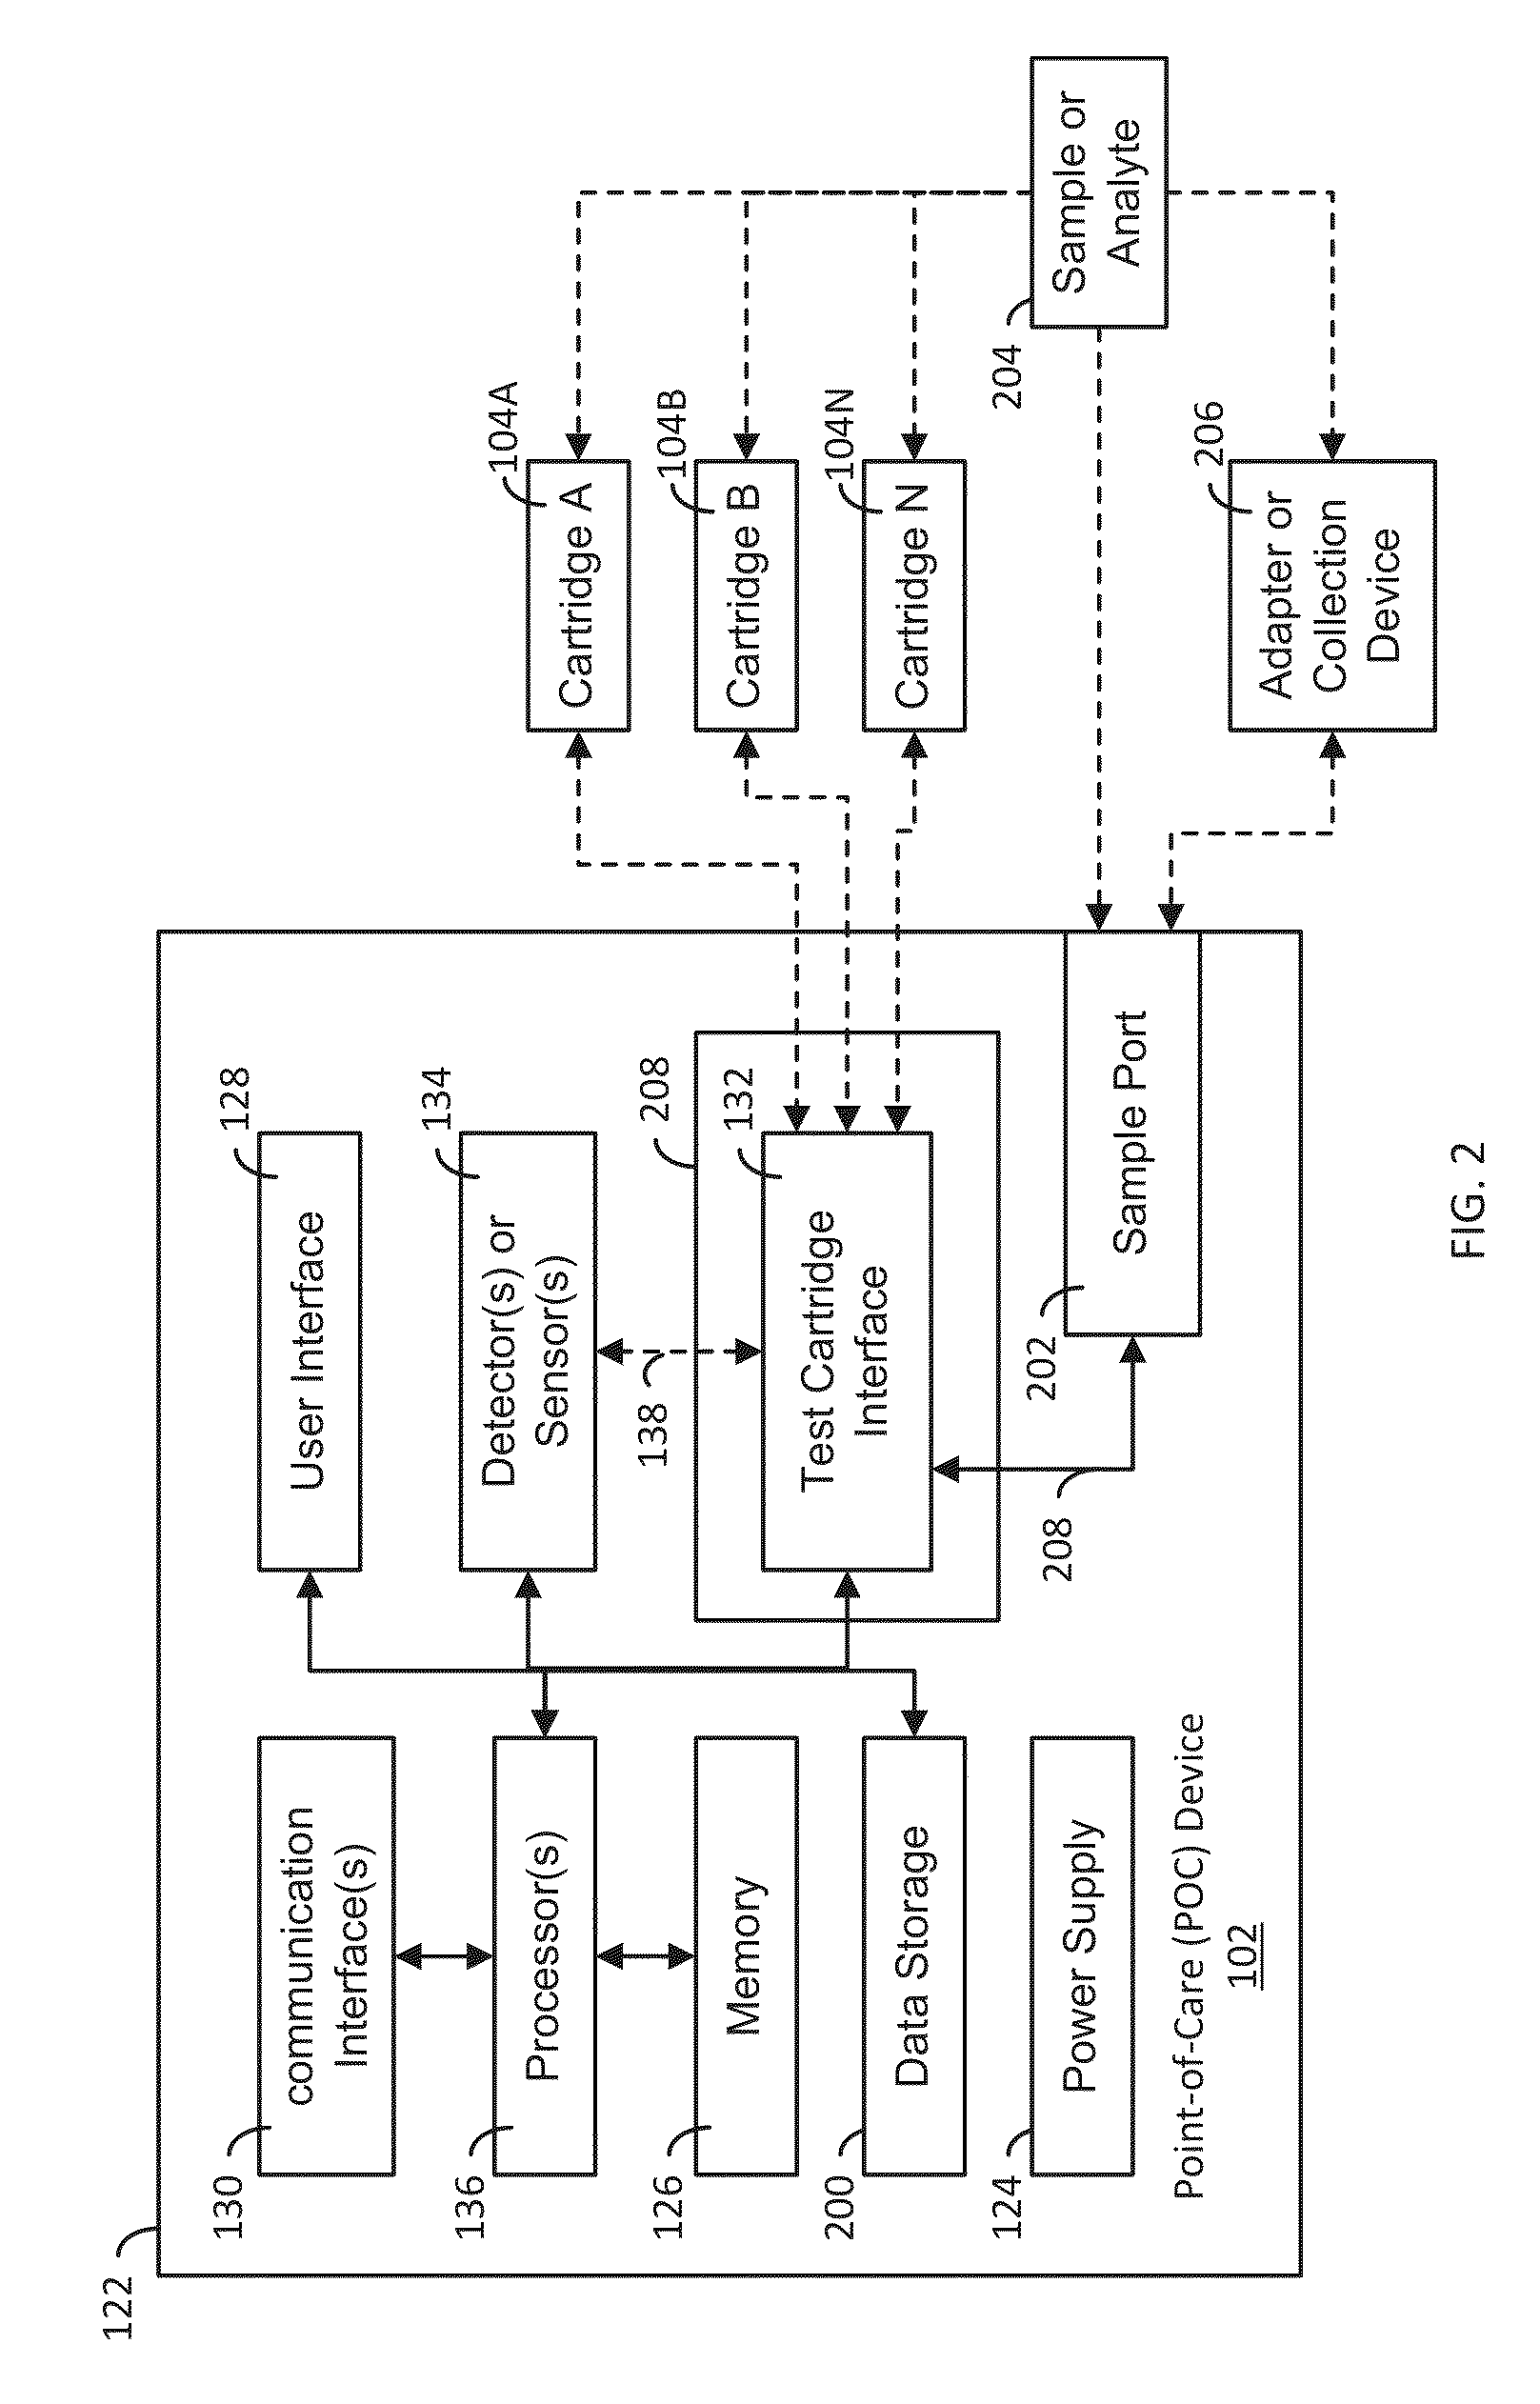 System, apparatus and method for evaluating samples or analytes using a point-of-care device